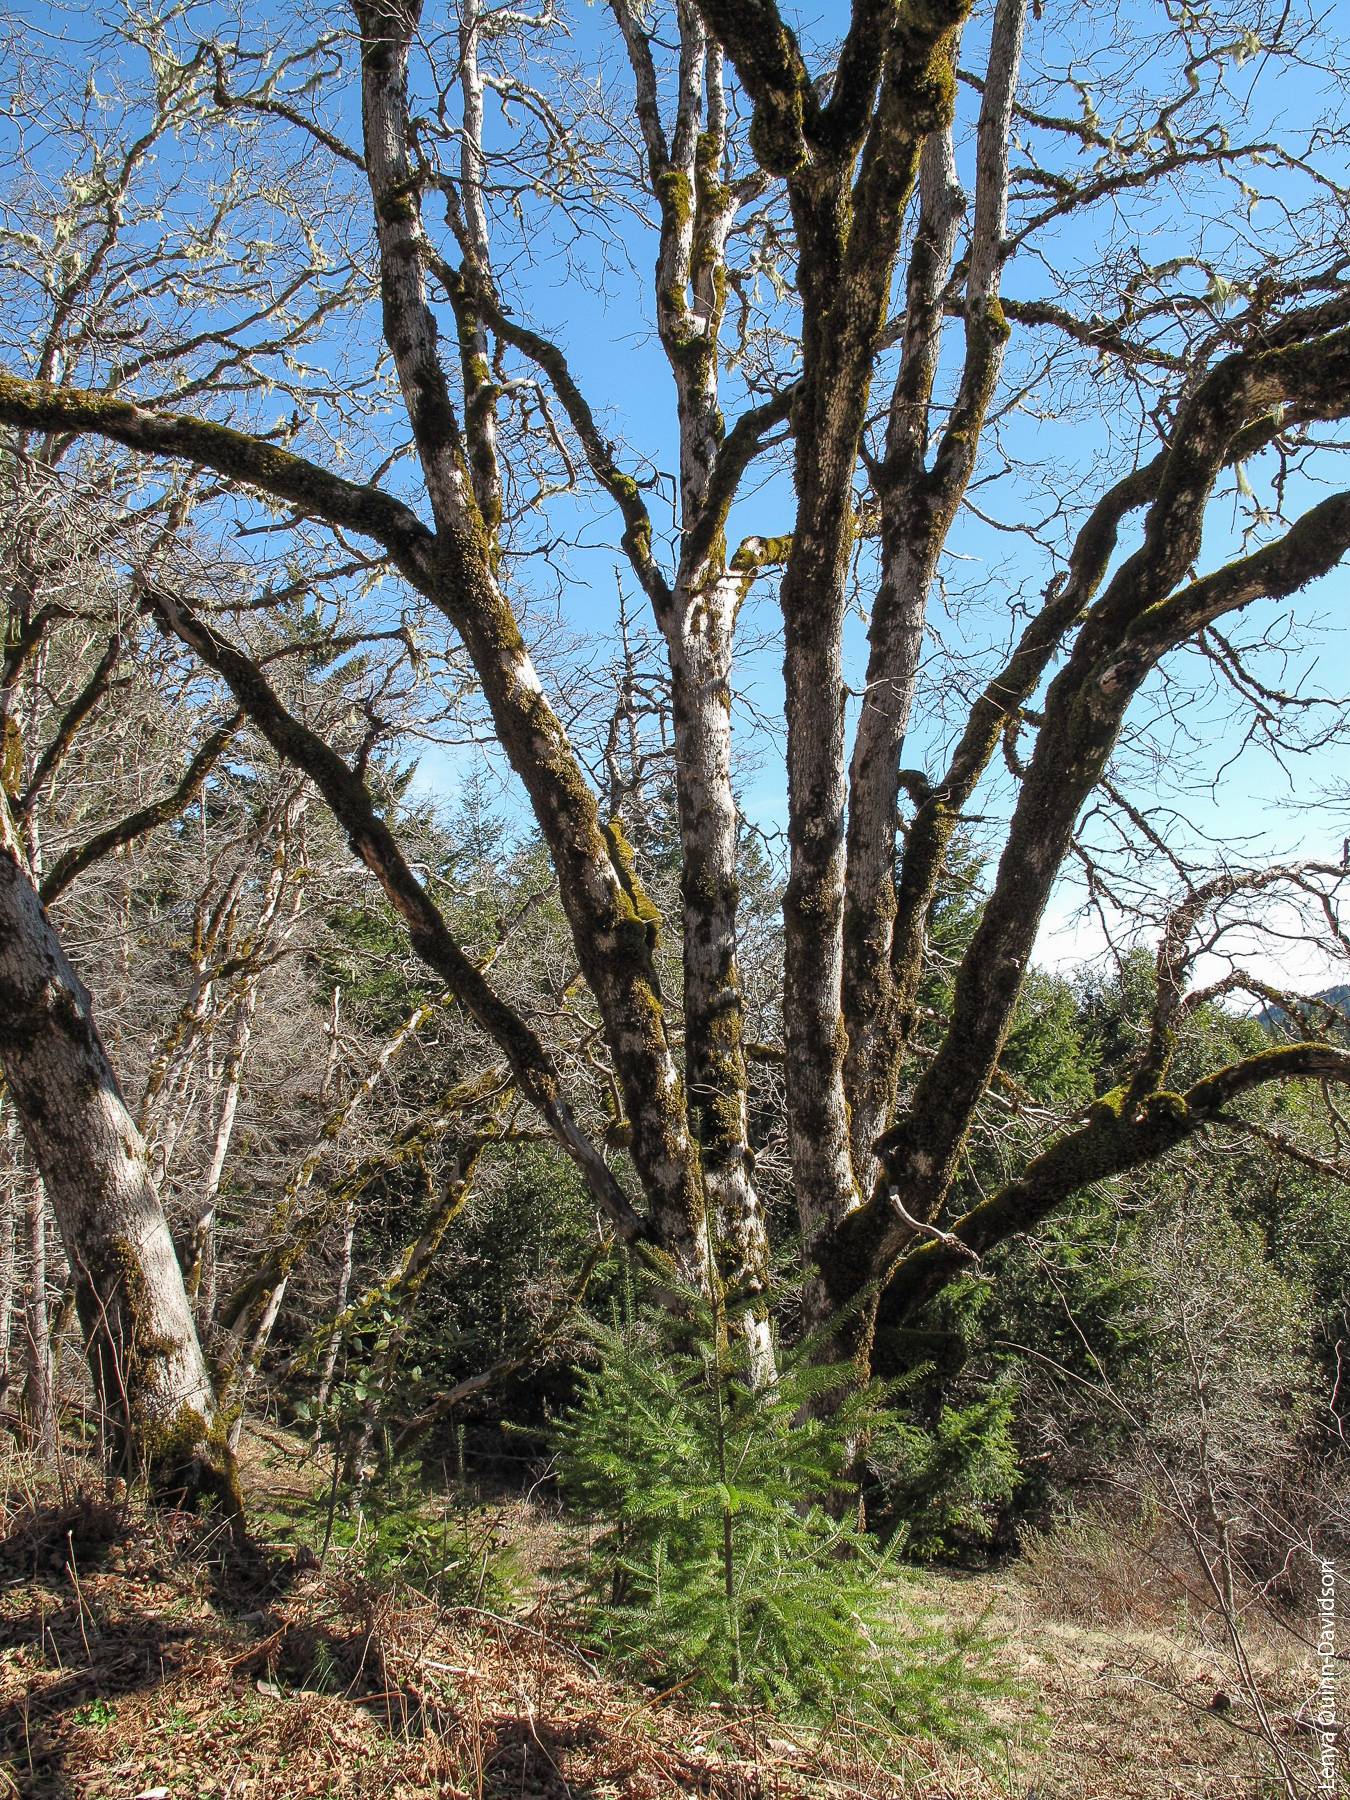 Fire suppression helps to create conditions that allow conifers to sprout and mature among oaks, as in this woodland in Redwood National Park.